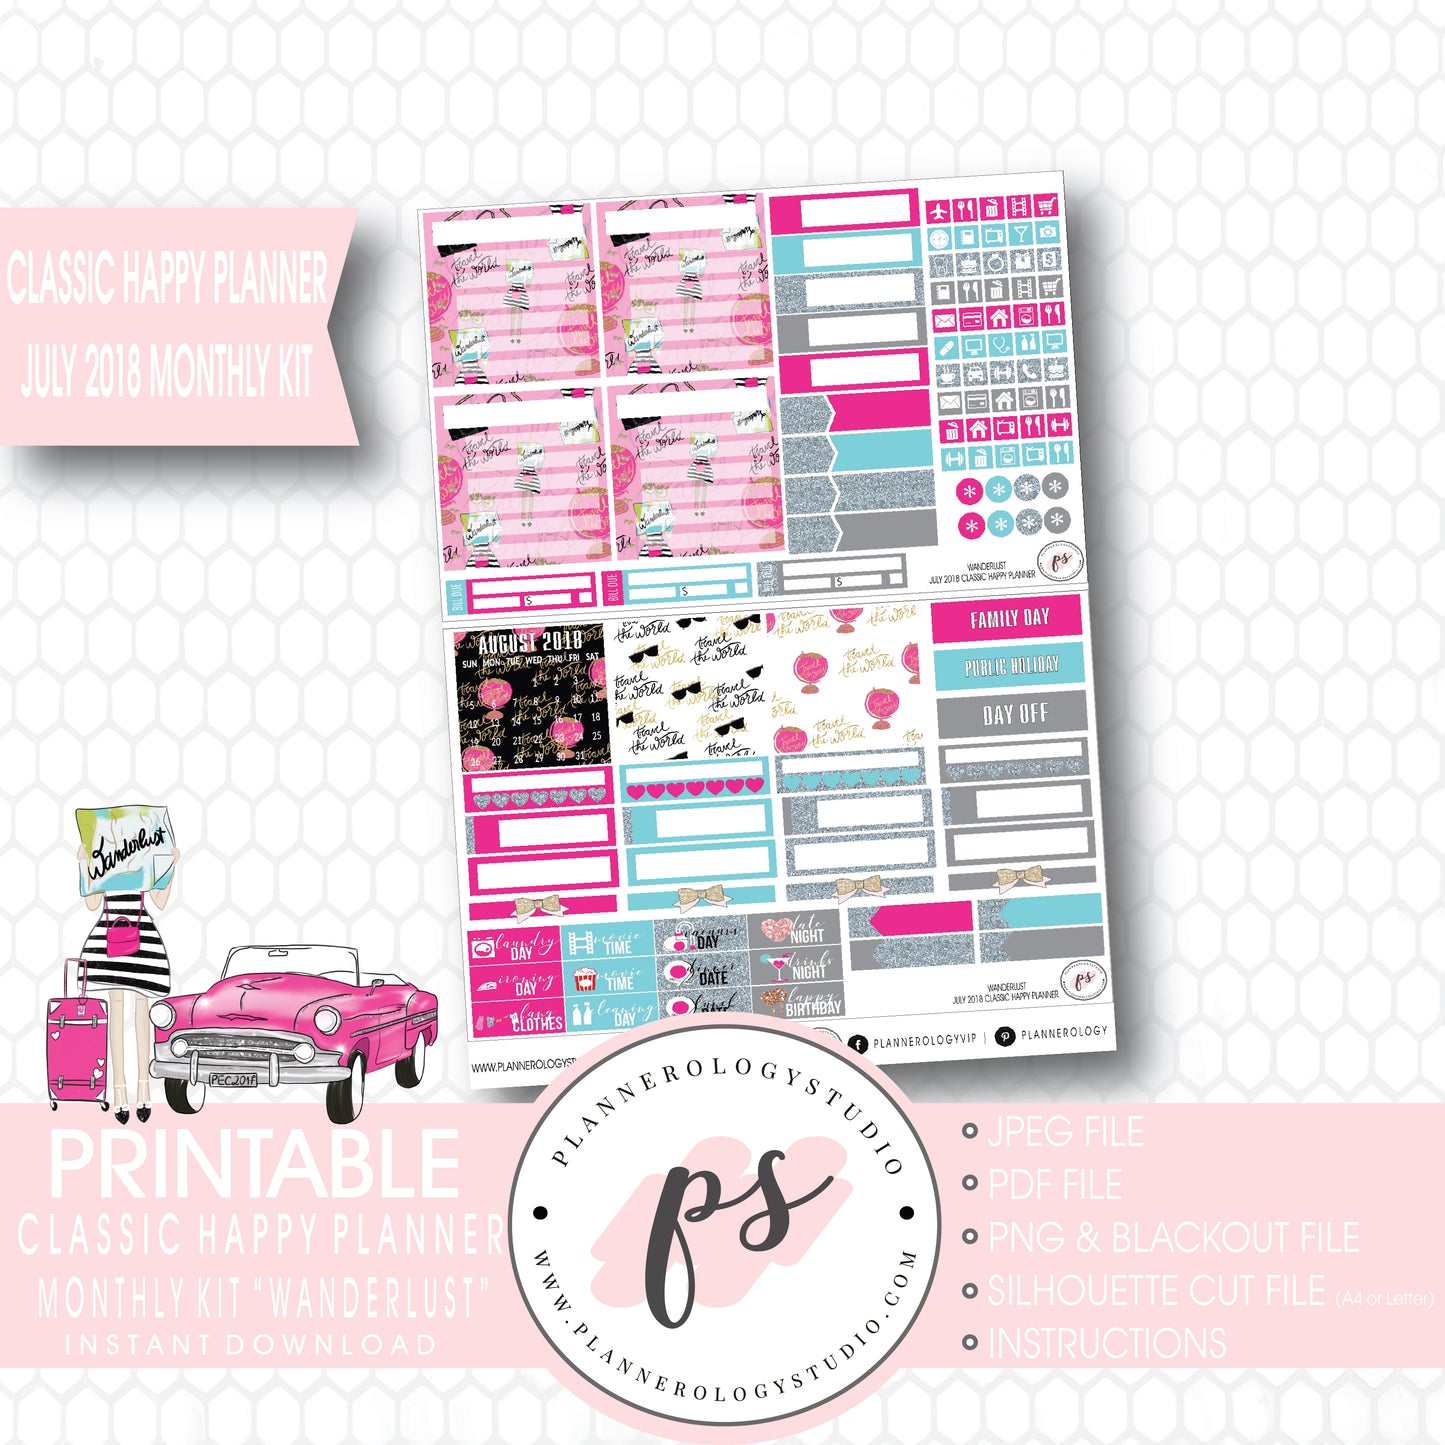 Wanderlust July 2018 Monthly View Kit Digital Printable Planner Stickers (for use with Classic Happy Planner) - Plannerologystudio